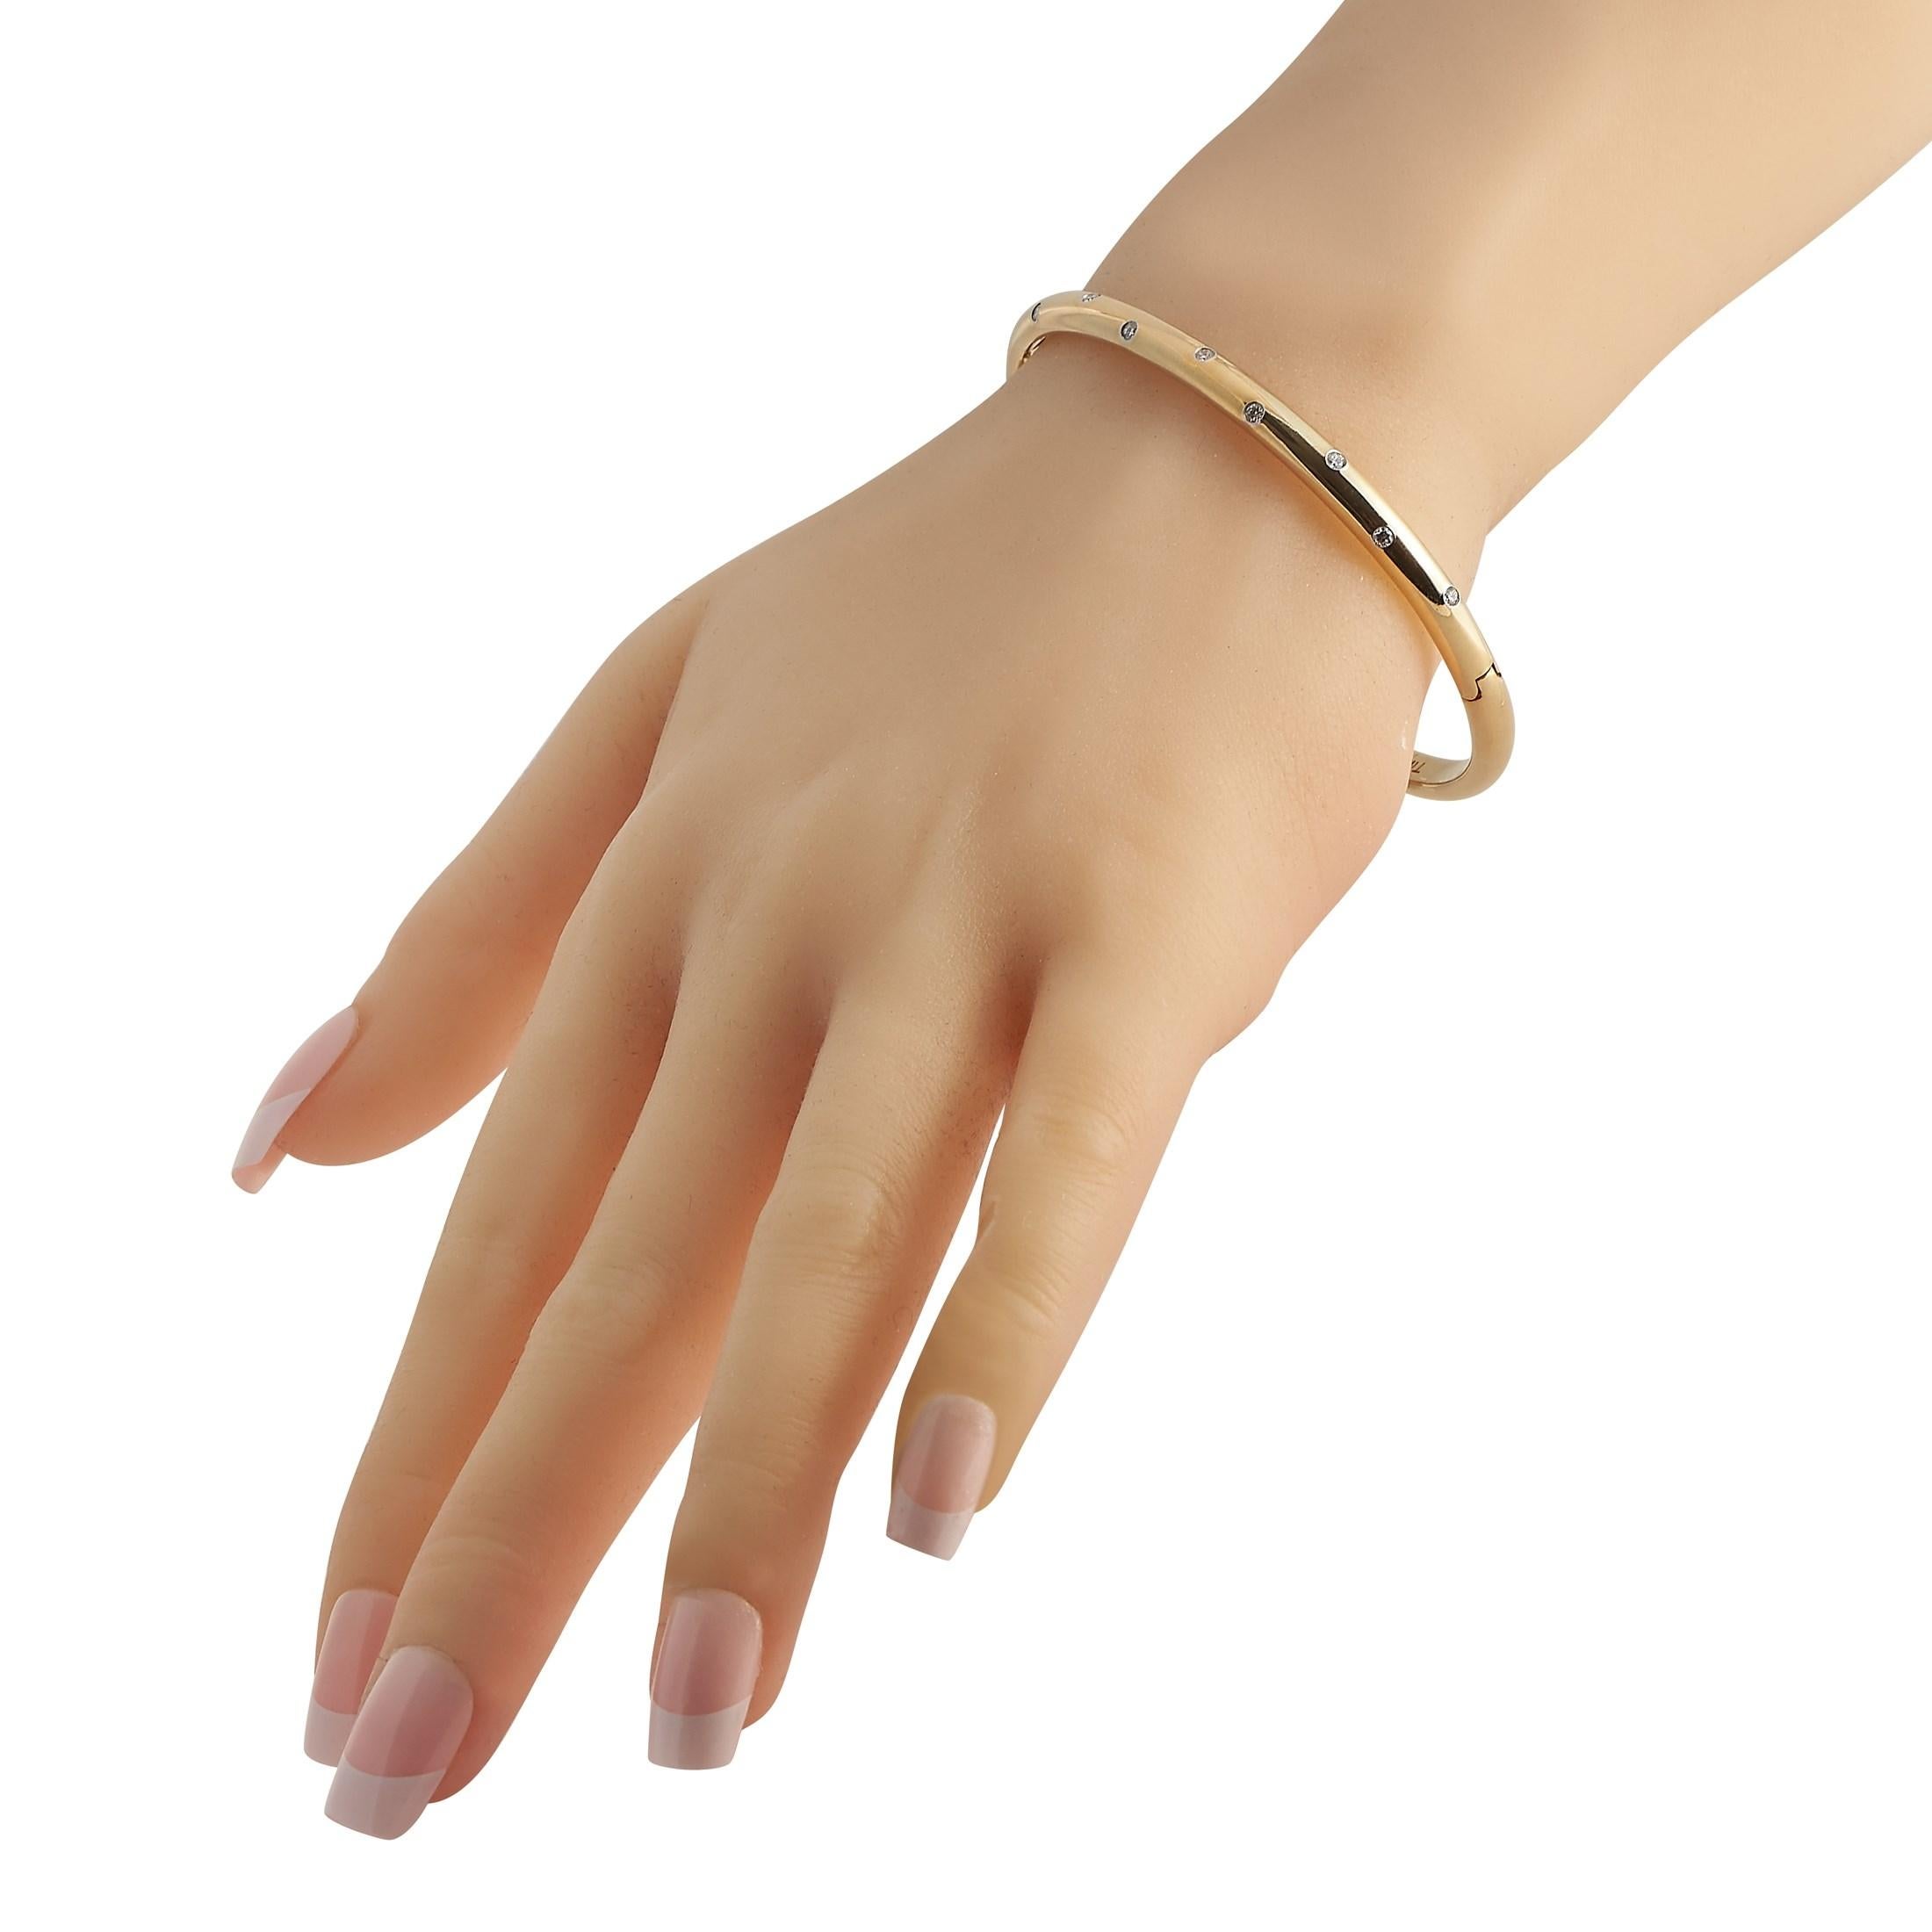 This minimalist bangle bracelet from Tiffany & Co. offers maximum versatility. The Etoile Bangle Bracelet has a simple and modern silhouette with its slender rigid bracelet in 18K yellow gold. The smooth and polished bracelet surface comes